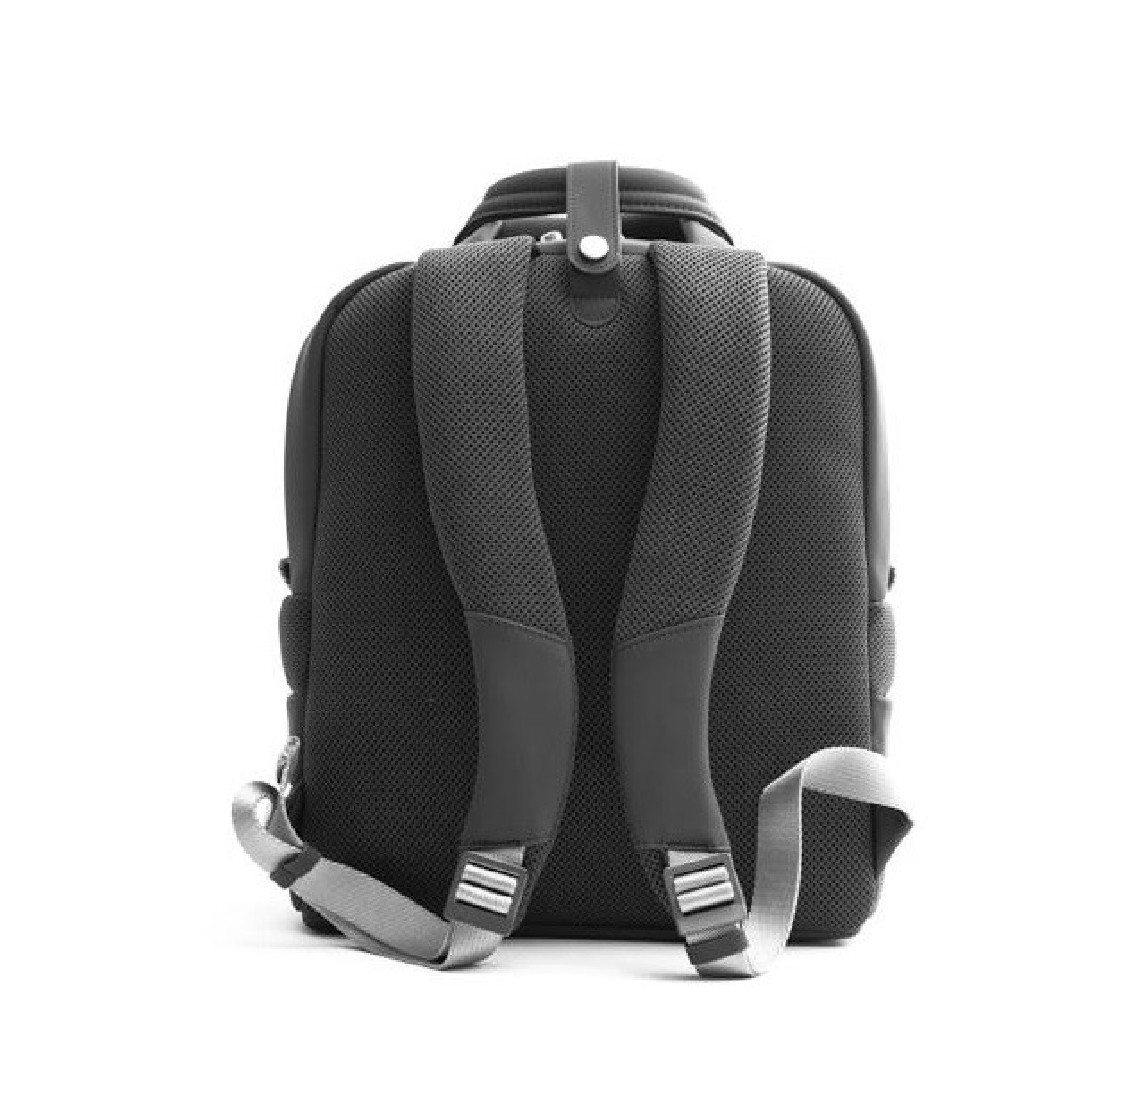 NAVA Square backpack with 2 handles and RFID pocket - Easy Break Black/Grey